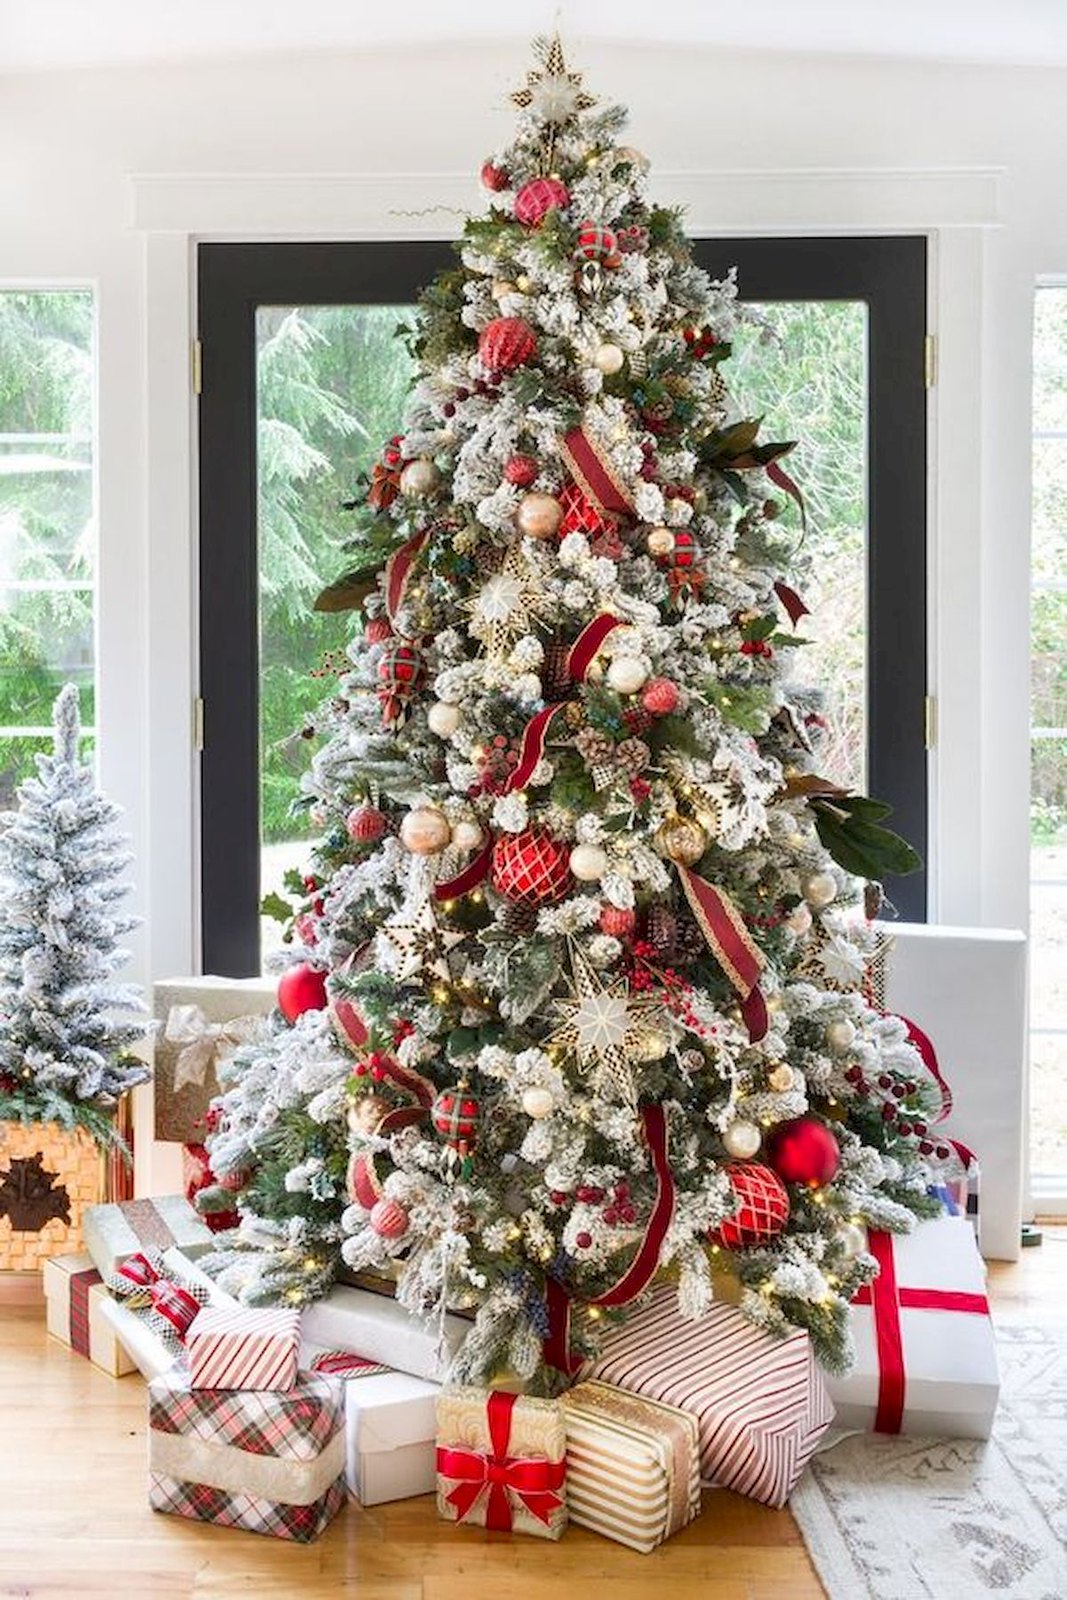 10 Ways to Decorate Your Christmas Tree - Over the Top Christmas Tree